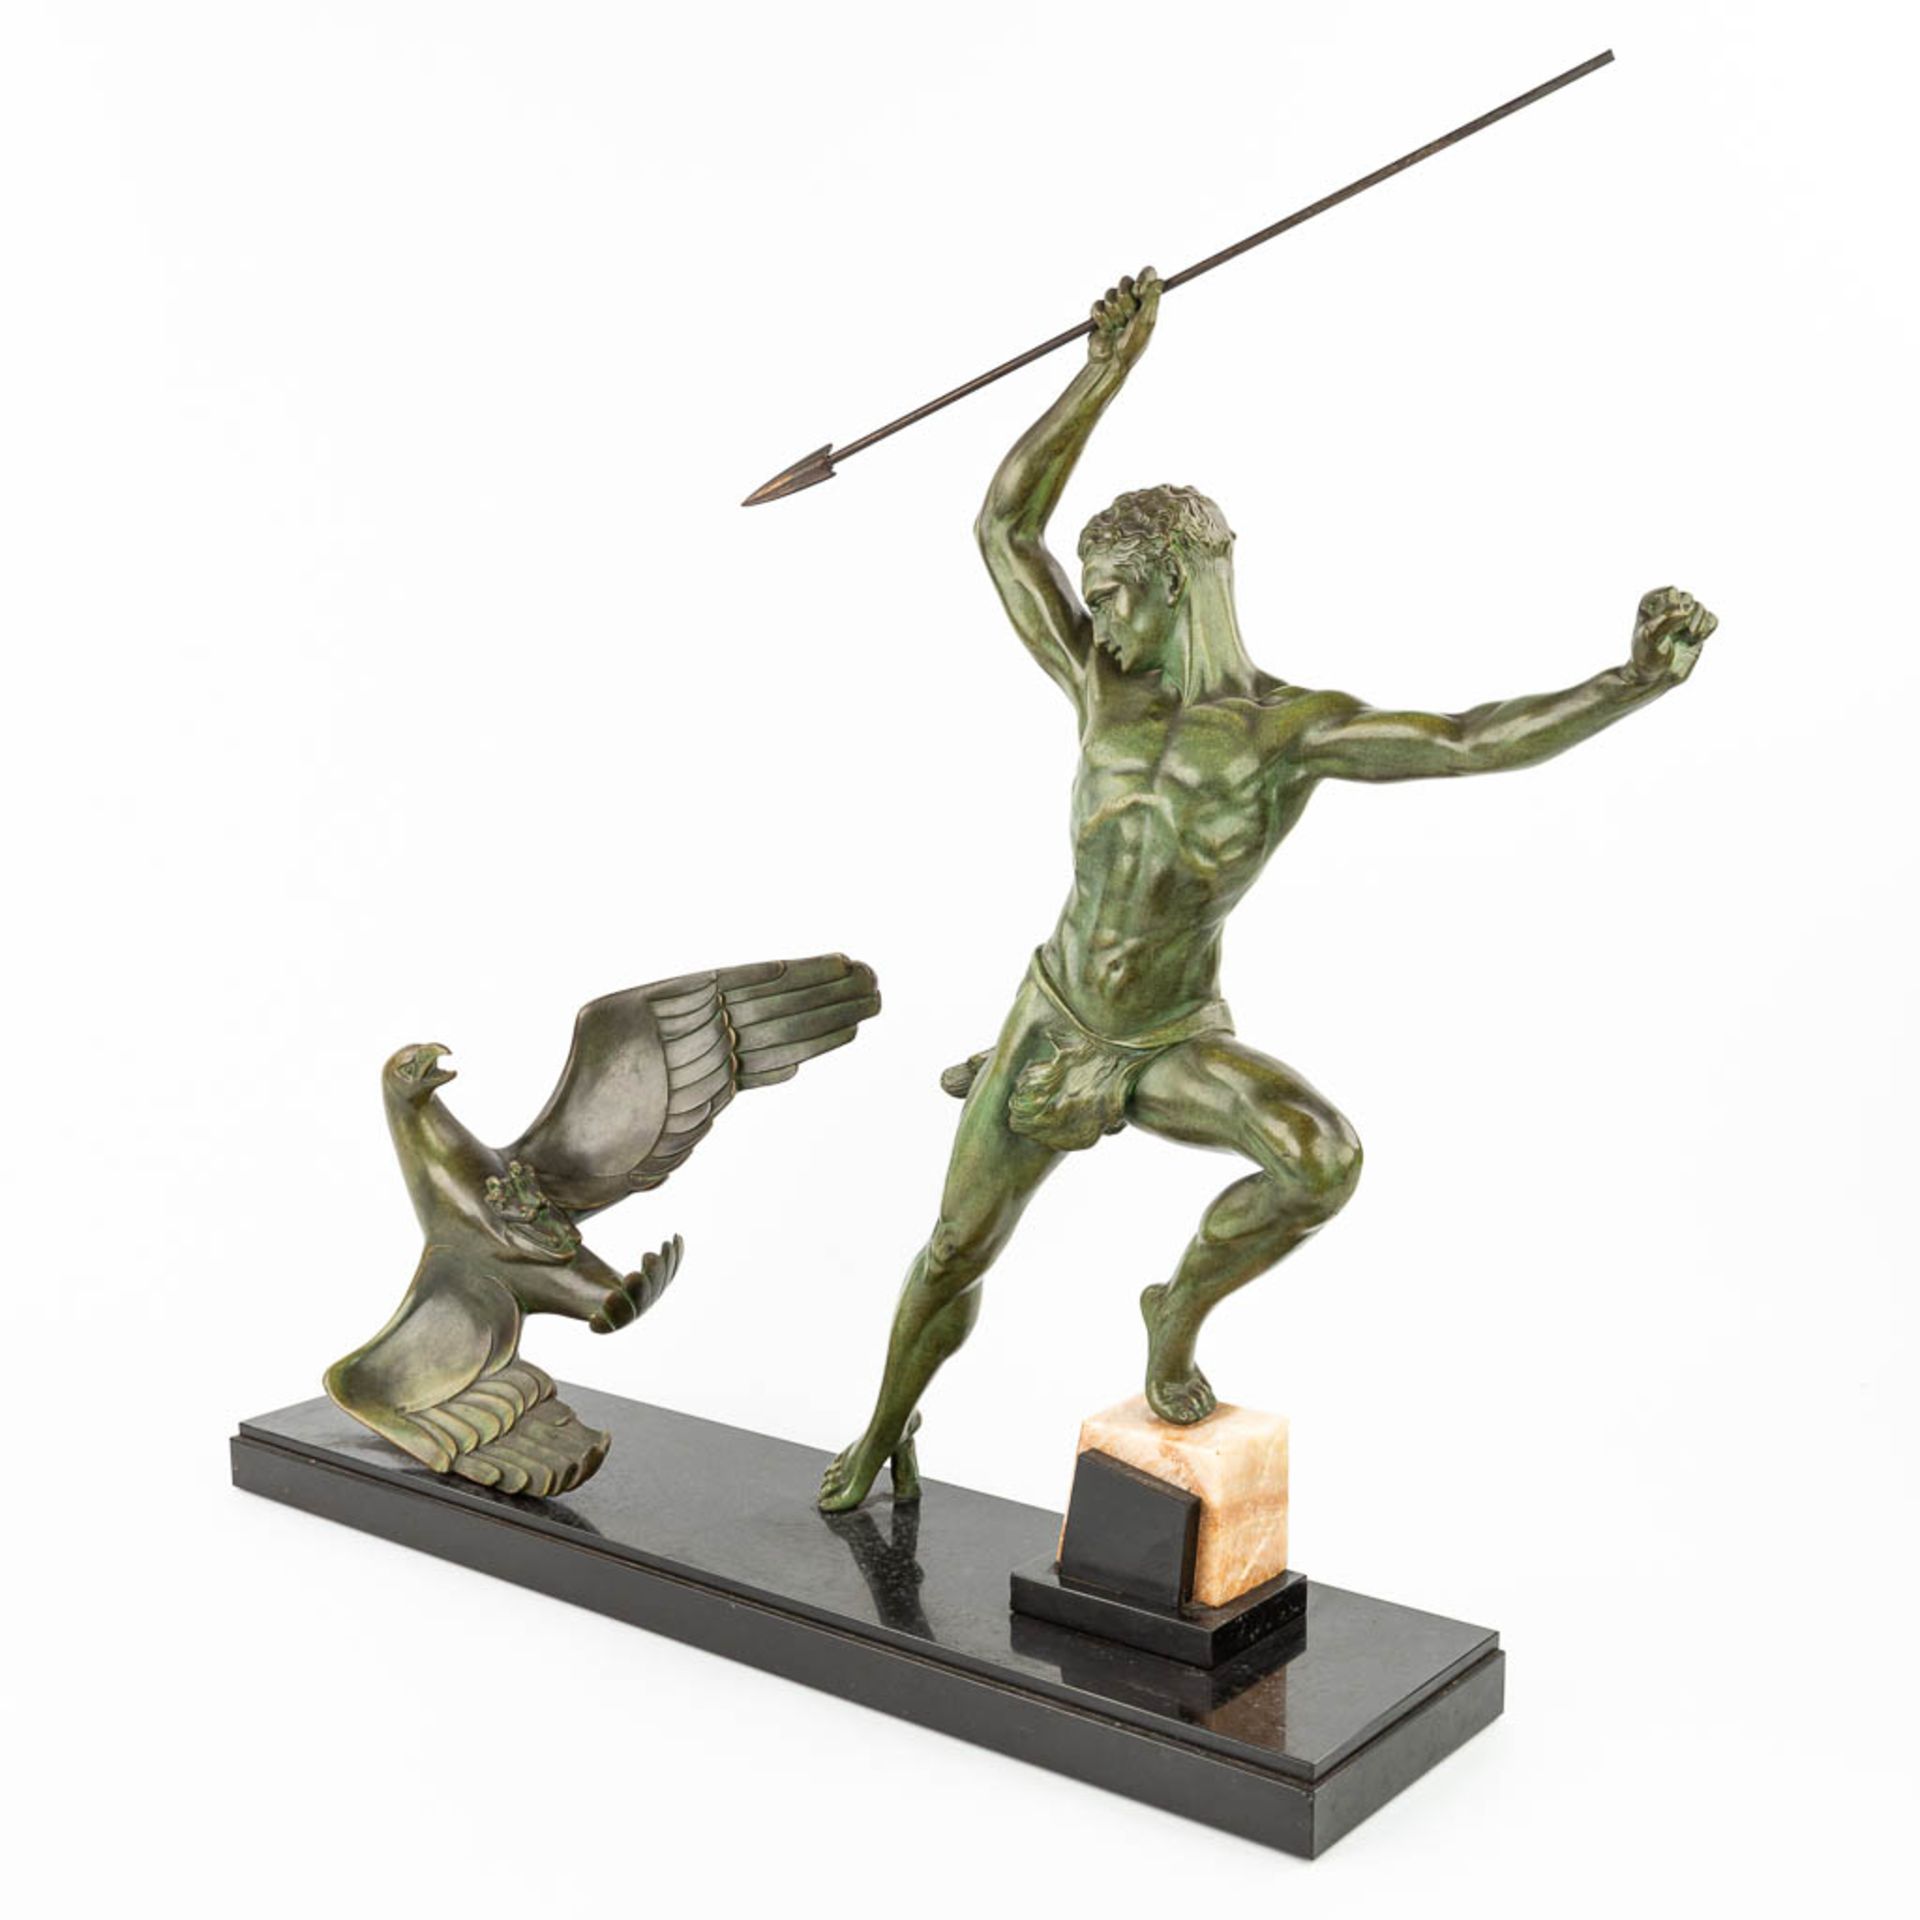 Jean DE RONCOURT (XIX-XX) 'Hunter with eagle', an art deco statue made of spelter. (H:66cm) - Image 9 of 10